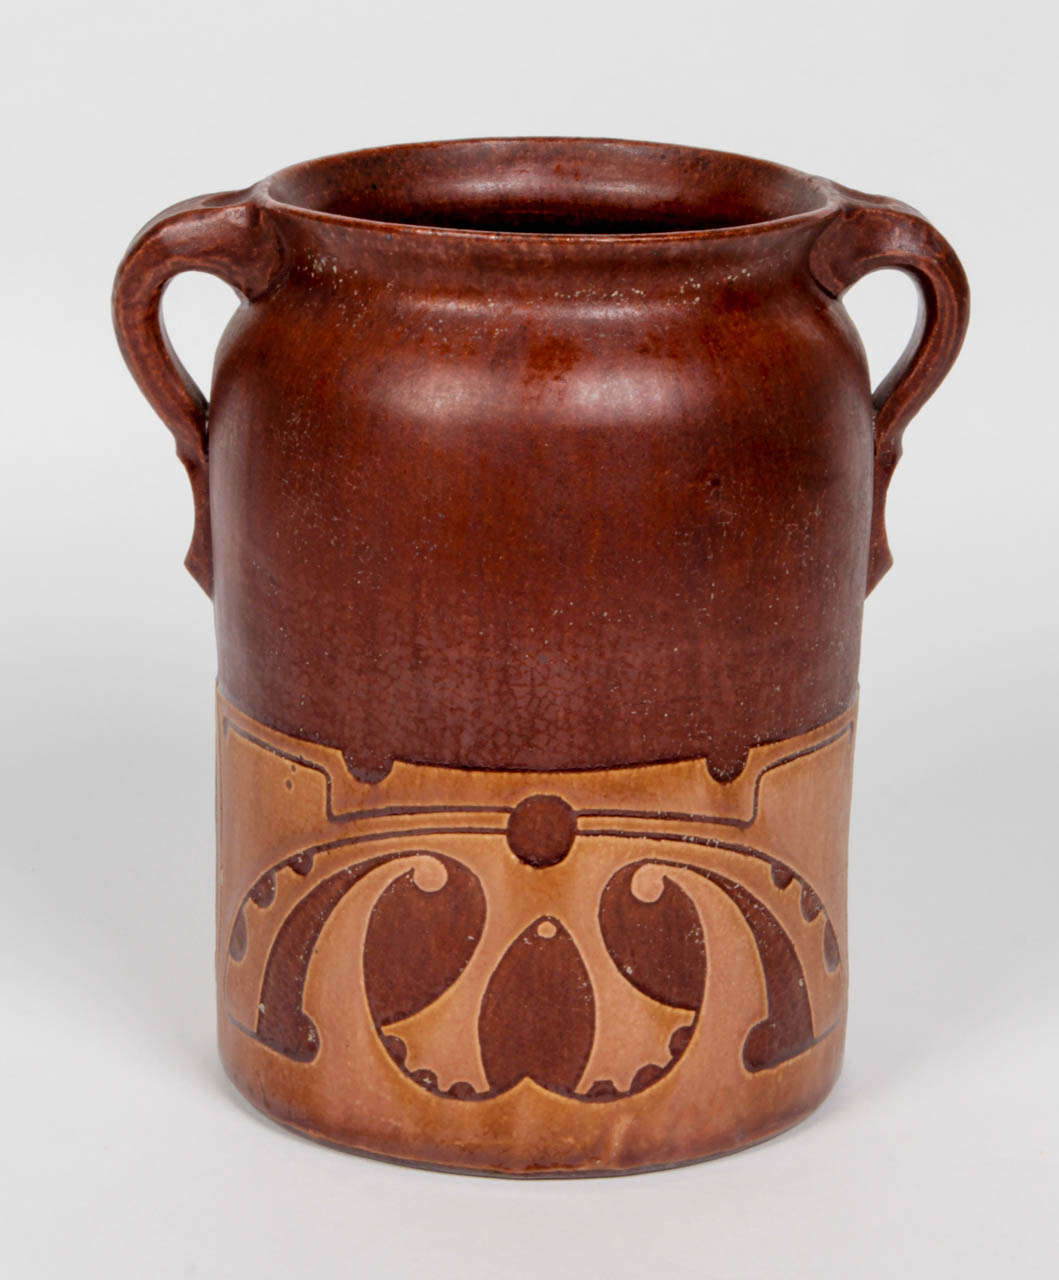 WILLEM COENRAAD BROUWER  (1877-1933)  The Netherlands
POTTERIJ VREDELUST  Leiderdorp, The Netherlands

Vase with handles  circa 1905

Brown glazed red clay with tan light brown cut out overlaid and sgraffito decoration in a stylized organic